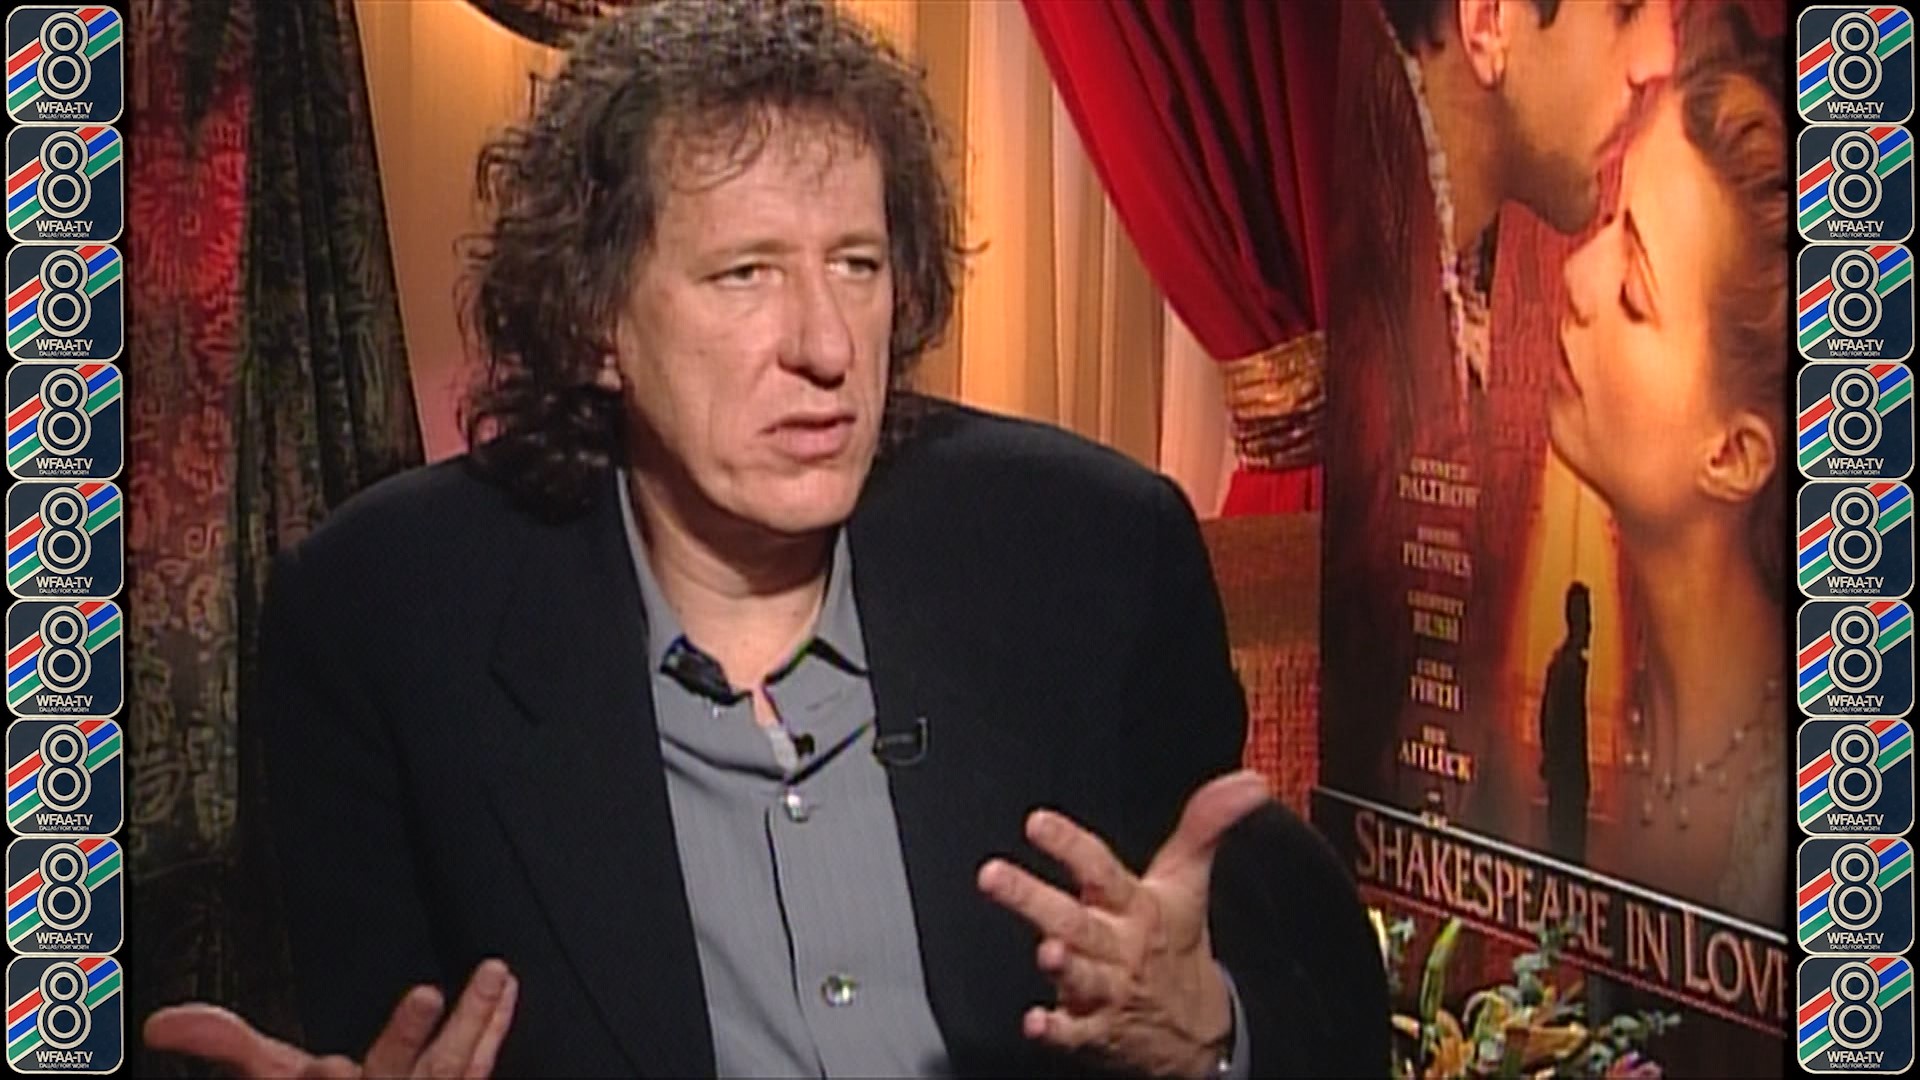 Geoffrey Rush sat down with WFAA to talk about taking on the role of Philip Henslowe in the 1998 film Shakespeare in Love.